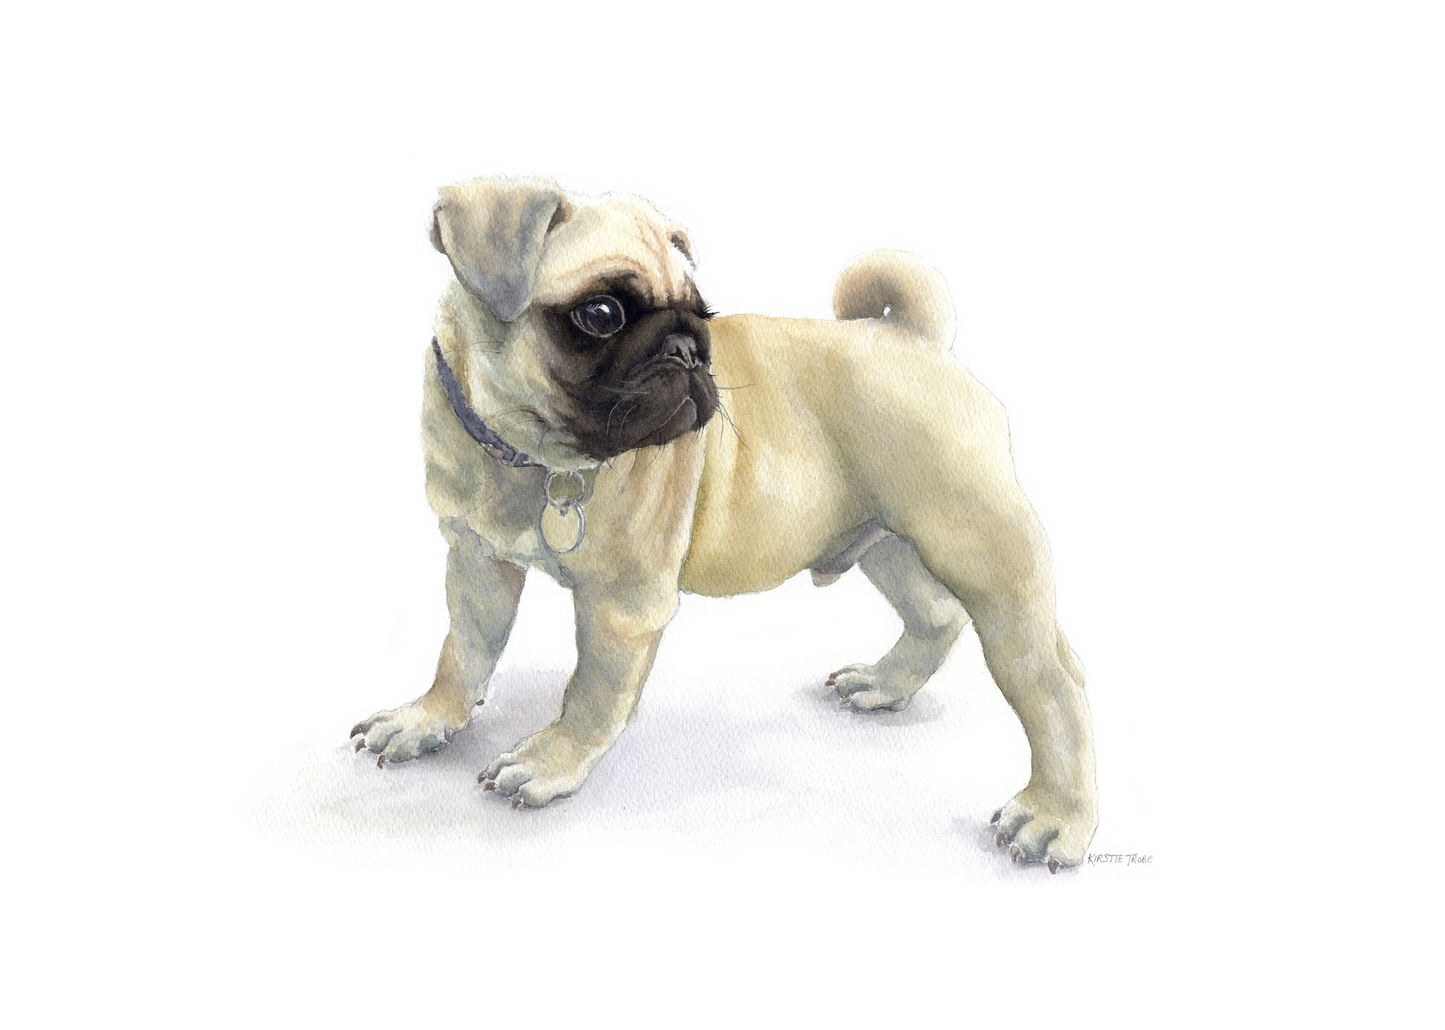 A fawn coloured Pug puppy stands boldly holding his ground whilst turning his head tailwards. Positioned centrally against a white background. Ready for anything, especially treats and cuddles.